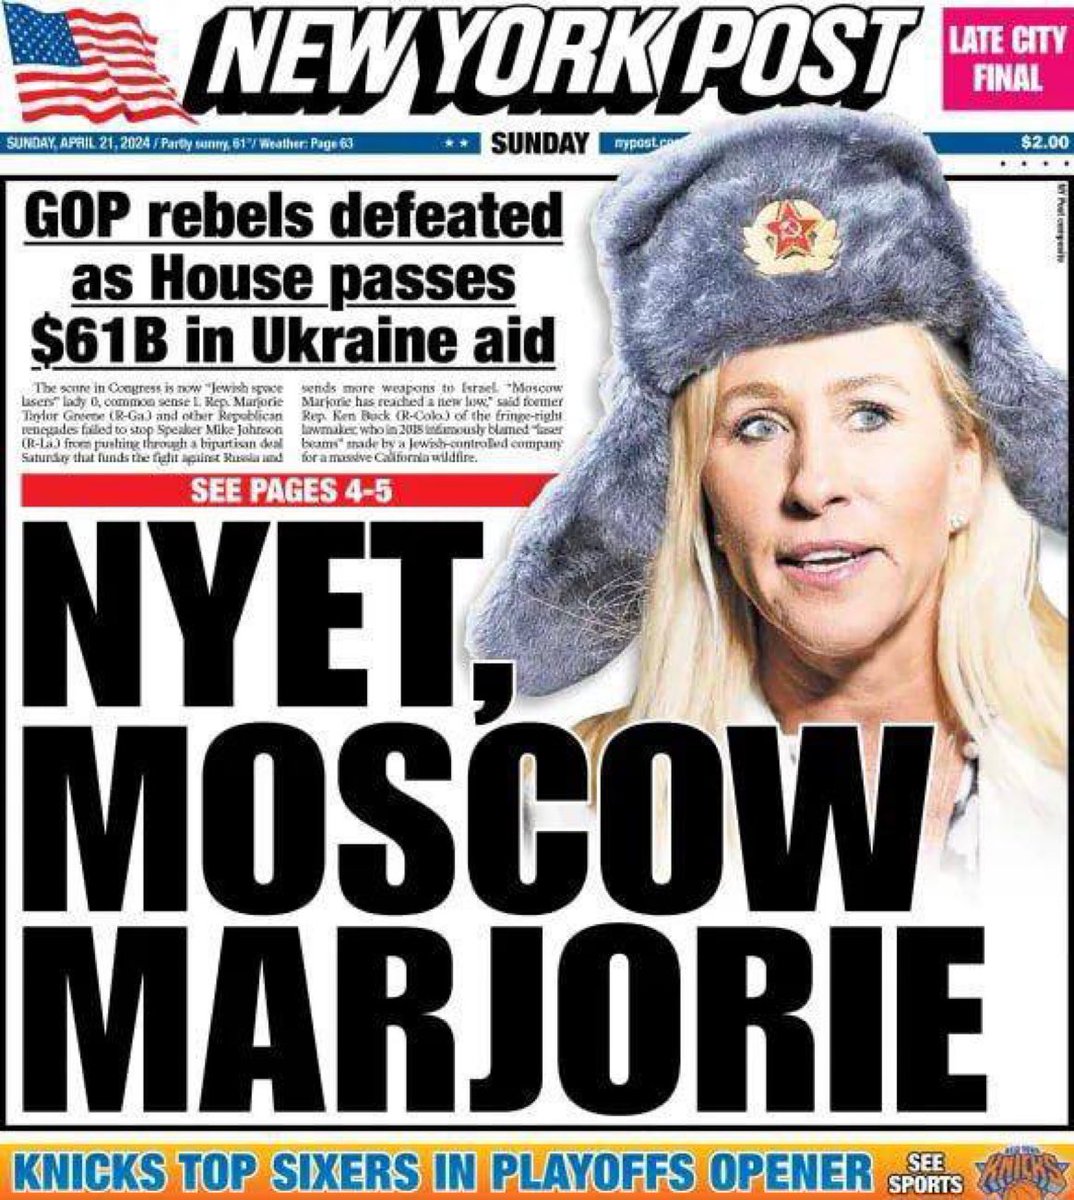 The New York Post front page today #GOPClownShowContinues #MoscowMajorie #MajorieAsset #RussianAsset #NYpost